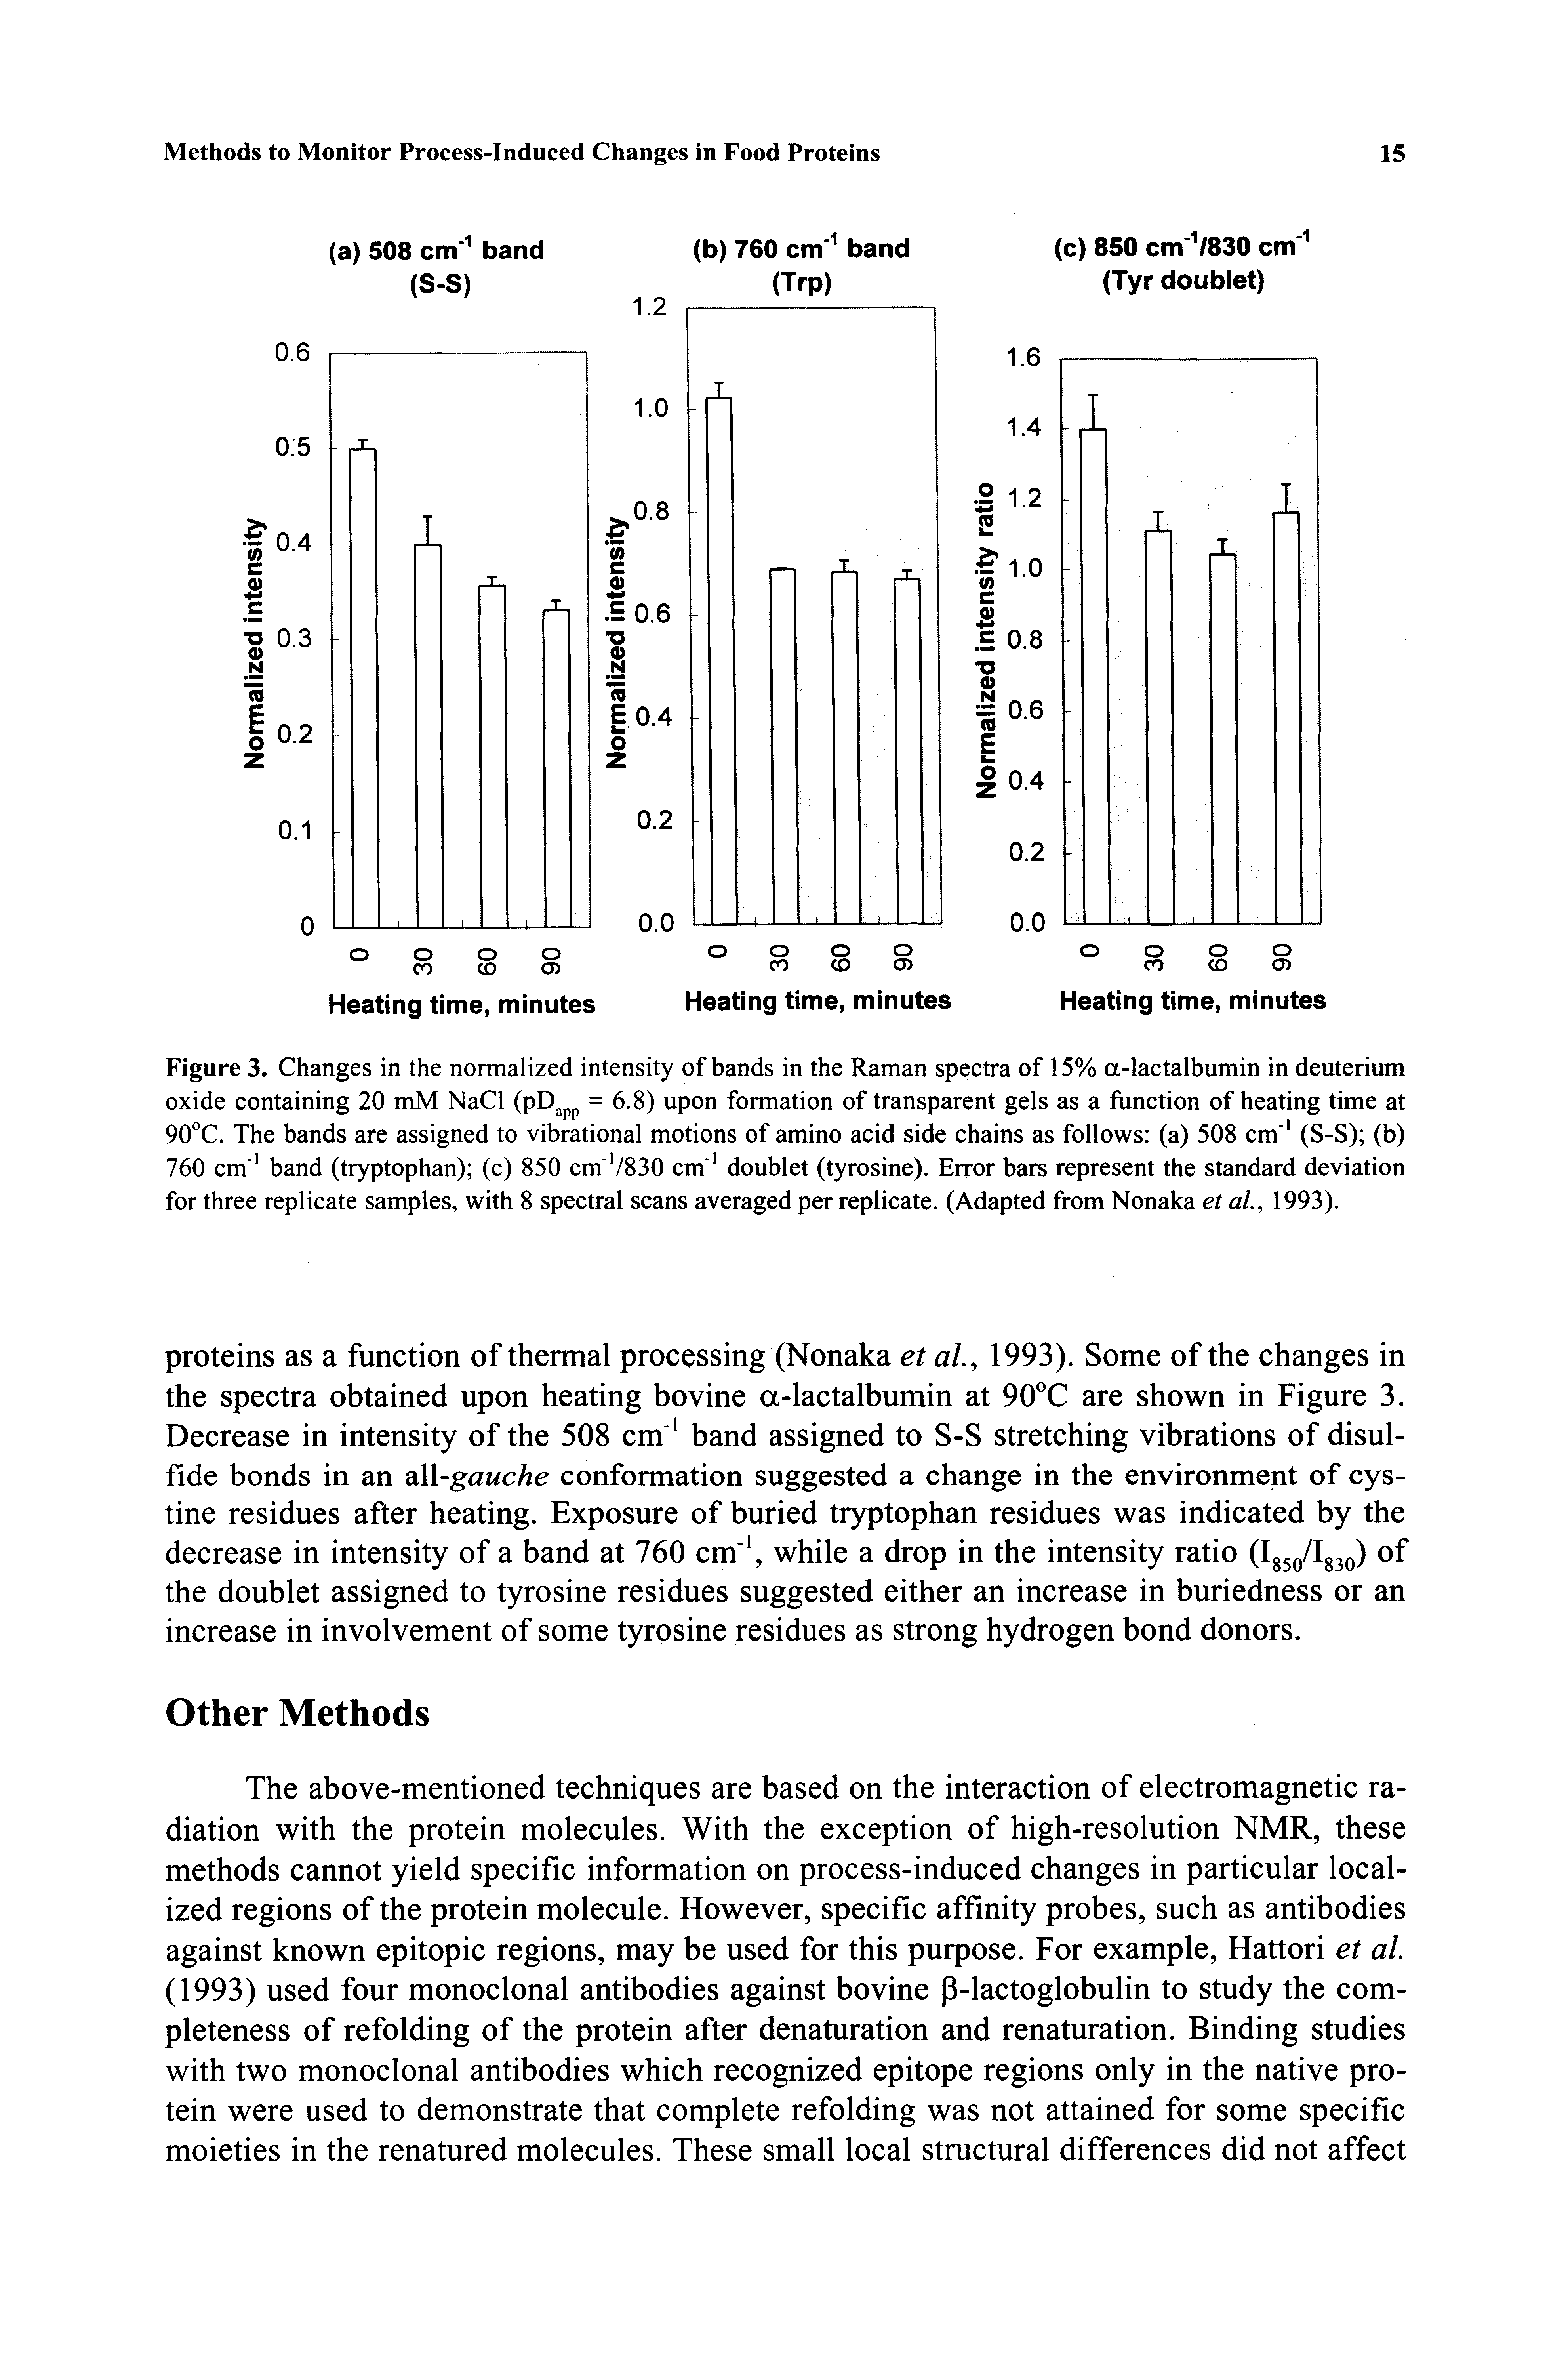 Figure 3. Changes in the normalized intensity of bands in the Raman spectra of 15% a-lactalbumin in deuterium oxide containing 20 mM NaCl (pD pp = 6.8) upon formation of transparent gels as a function of heating time at 90°C. The bands are assigned to vibrational motions of amino acid side chains as follows (a) 508 cm (S-S) (b) 760 cm band (tryptophan) (c) 850 cm /830 cm doublet (tyrosine). Error bars represent the standard deviation for three replicate samples, with 8 spectral scans averaged per replicate. (Adapted from Nonaka et al, 1993).